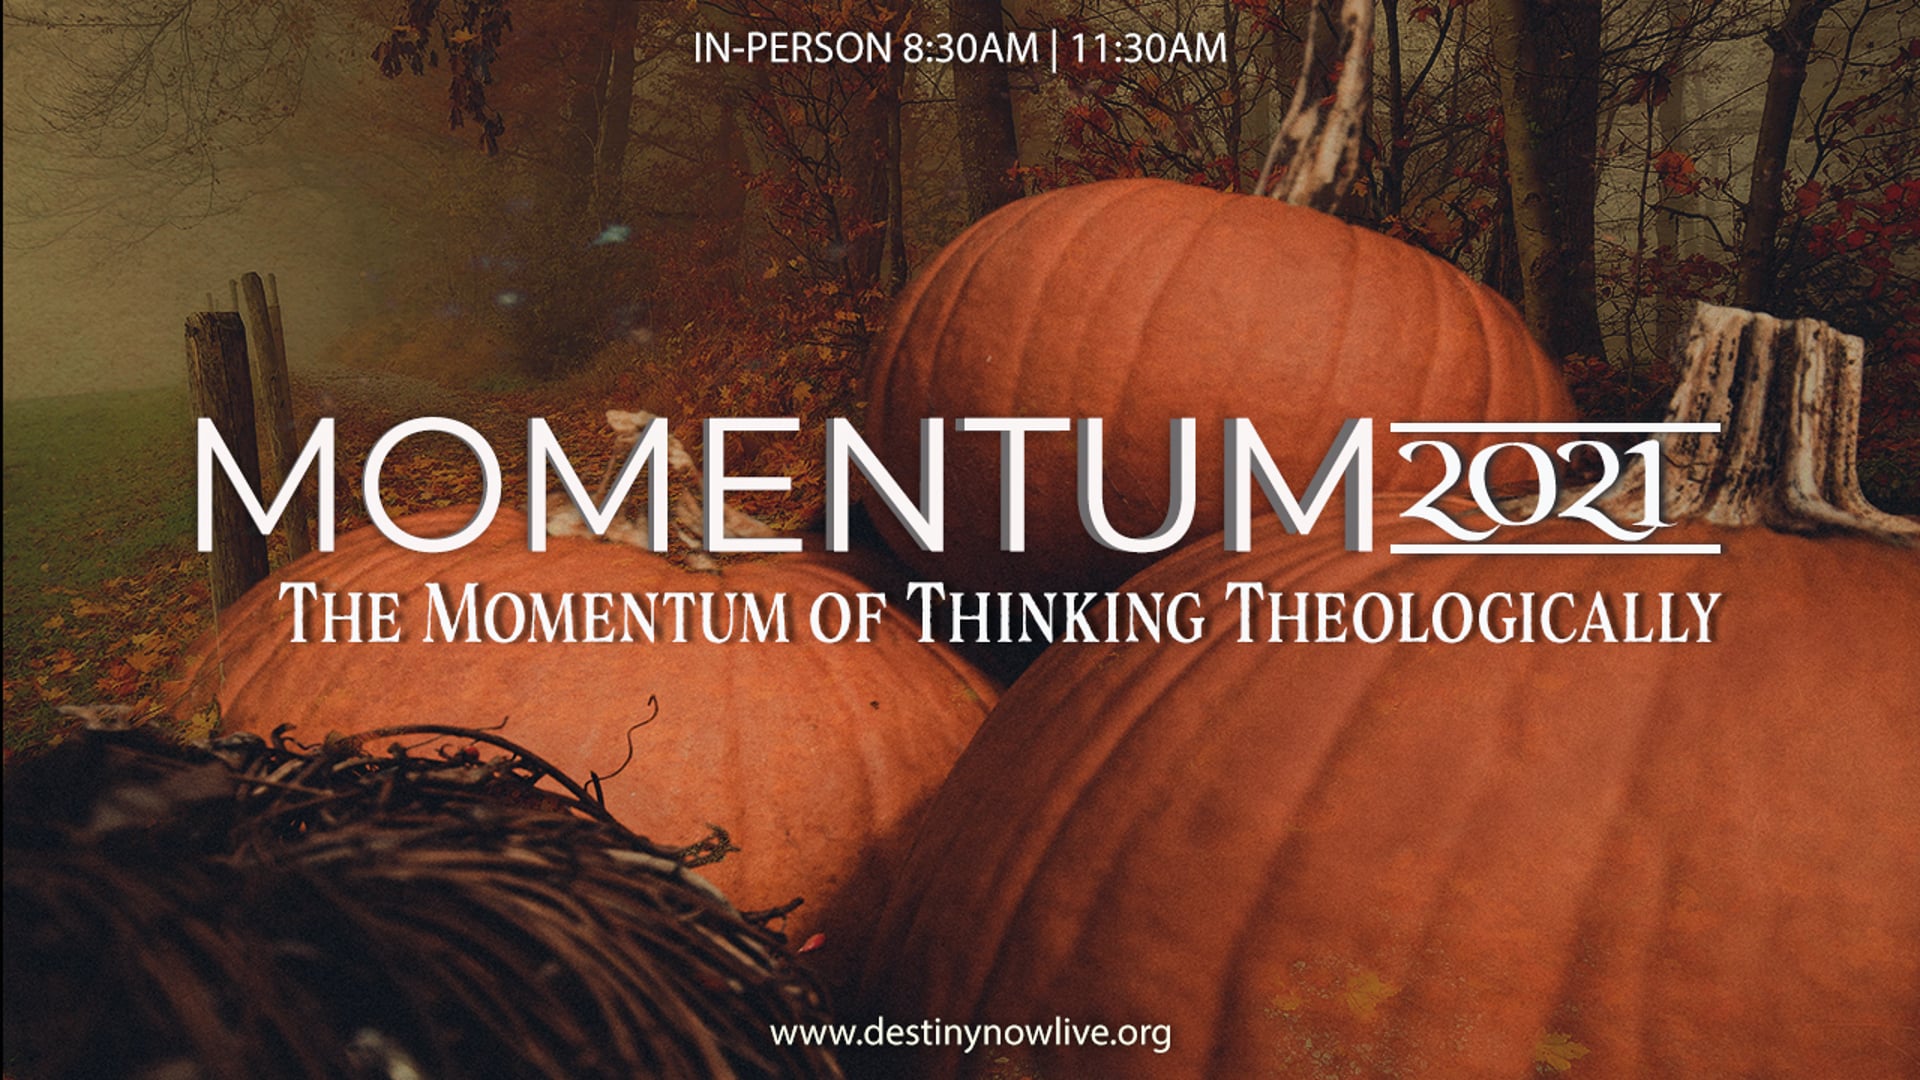 The Momentum of Thinking Theologically